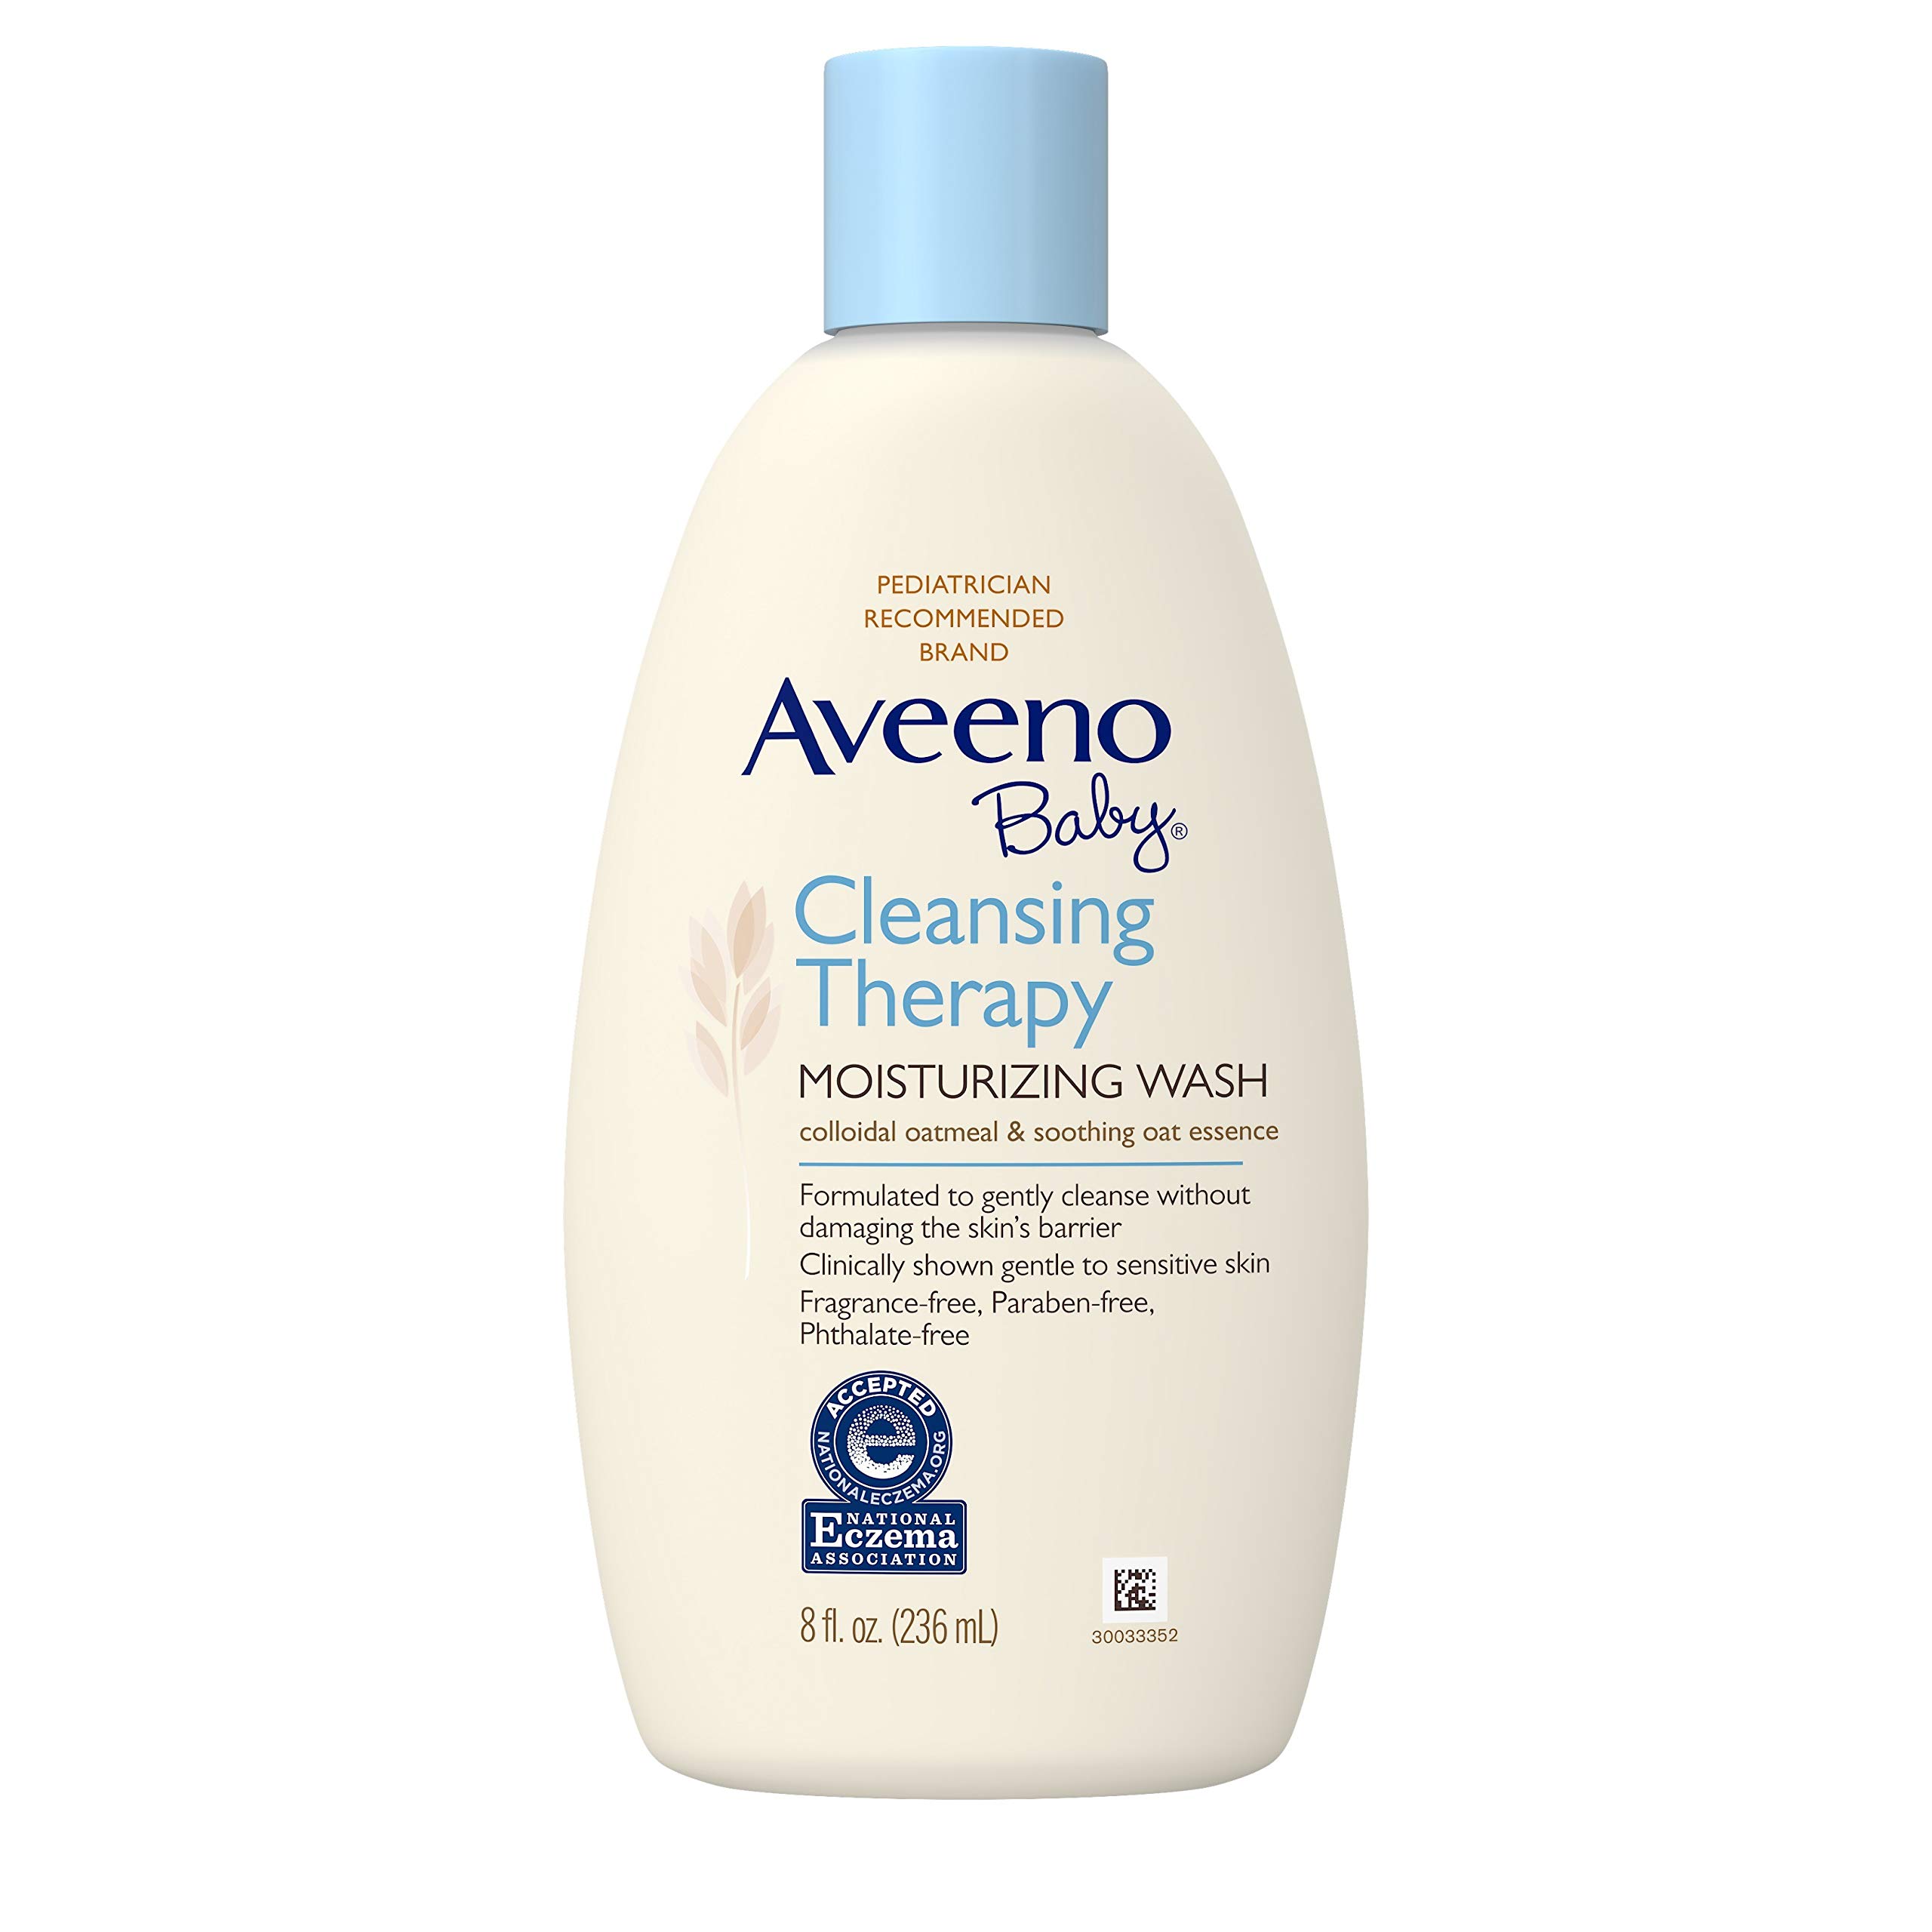 Aveeno Baby Cleansing Therapy Moisturizing Wash, Natural Colloidal Oatmeal, 8 fl. oz